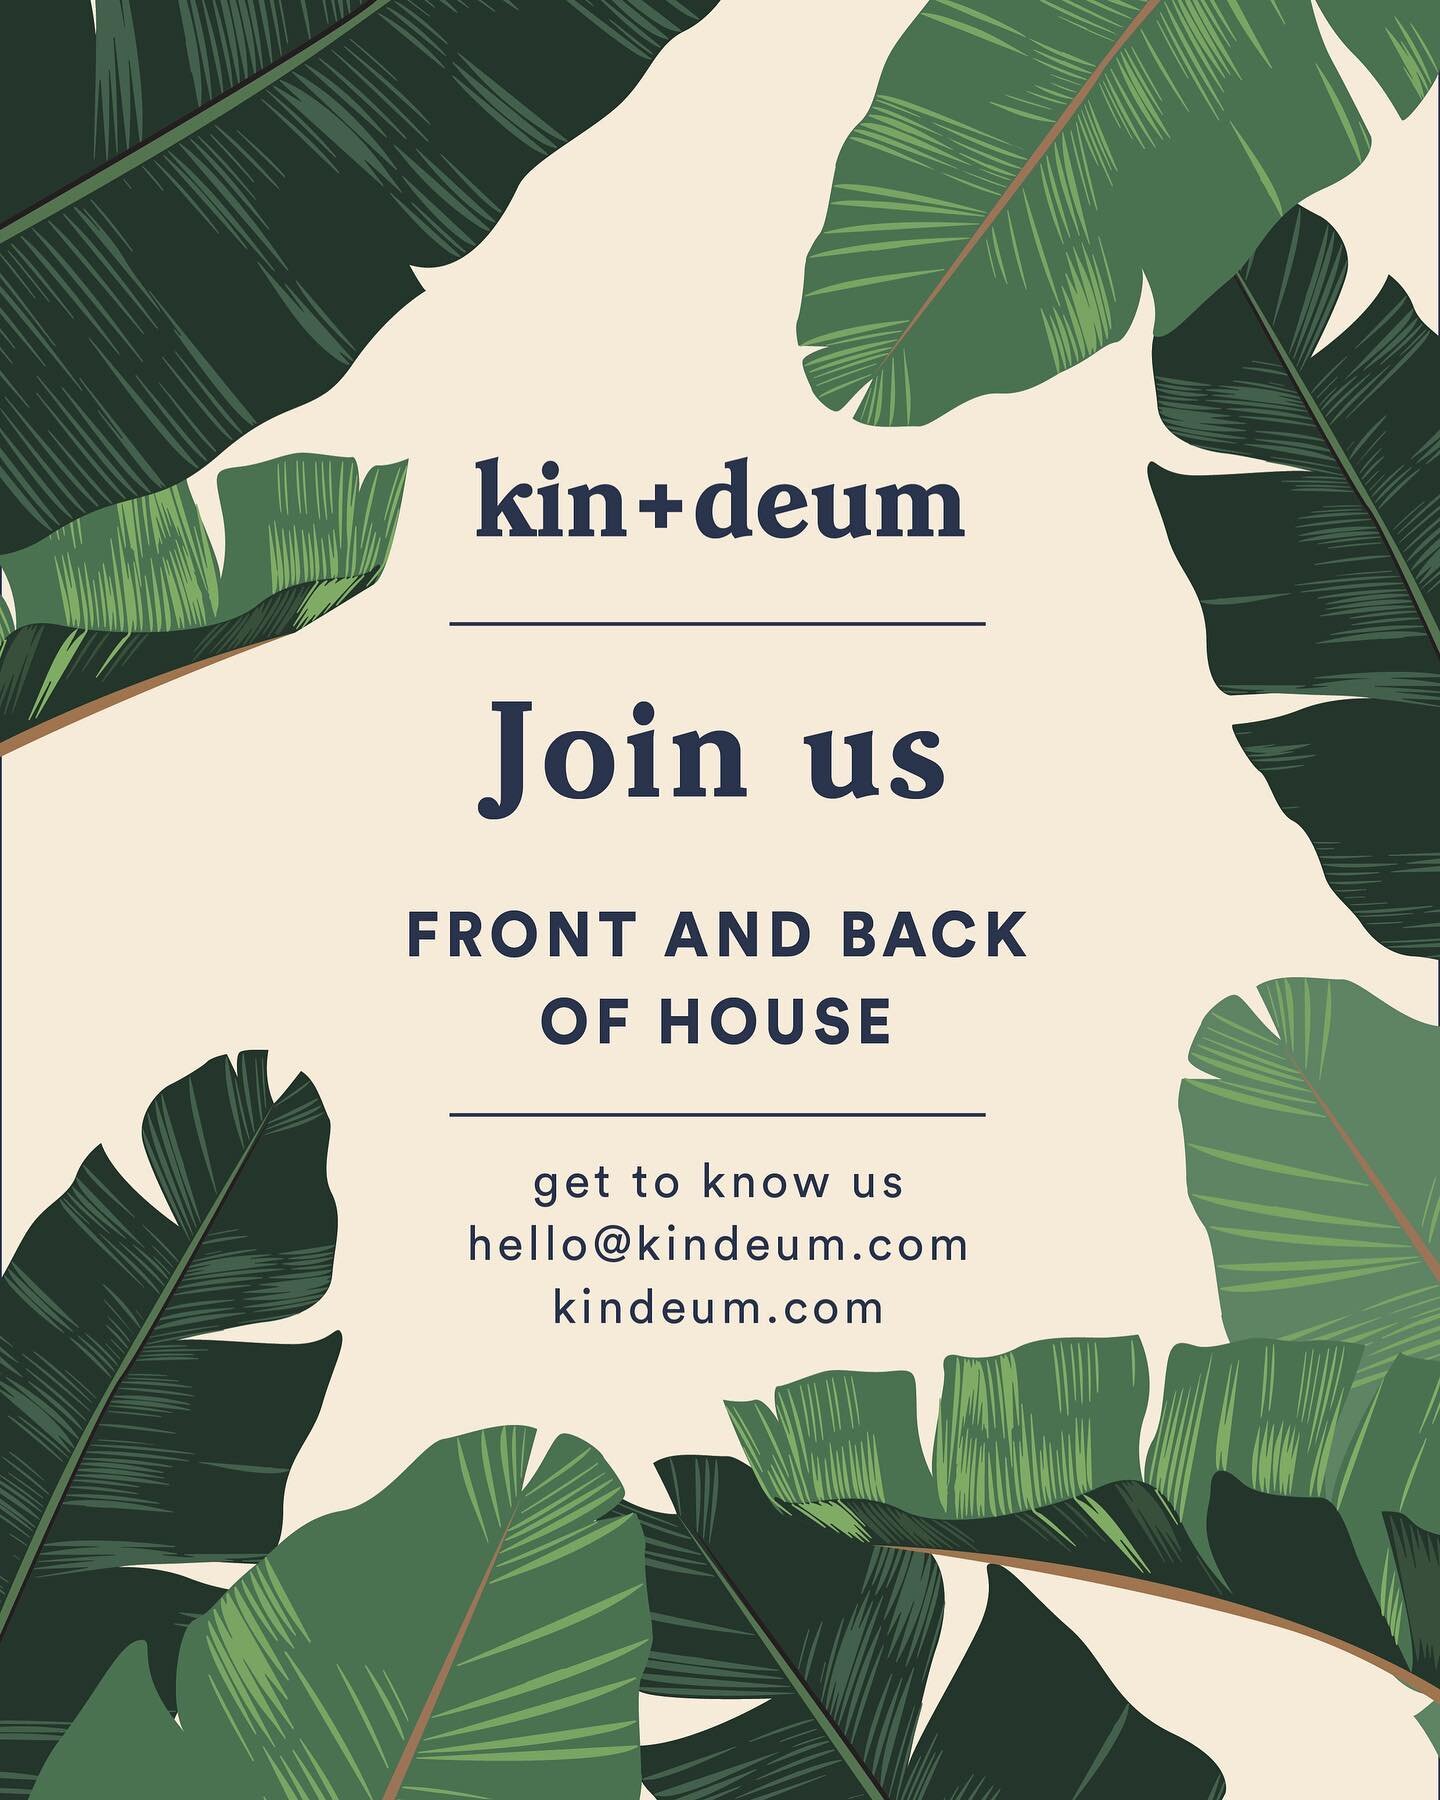 We&rsquo;re hiring! All roles on our new journey 👌🏻✨🌿

Say sawadee at hello@kindeum.com ! 

https://www.kindeum.com/
.
.
.
.
.
#architecture #art #artisan #plants #recruitment #jobs #thairestaurant #londonrestaurants #ootd #instafood #delivery #Th